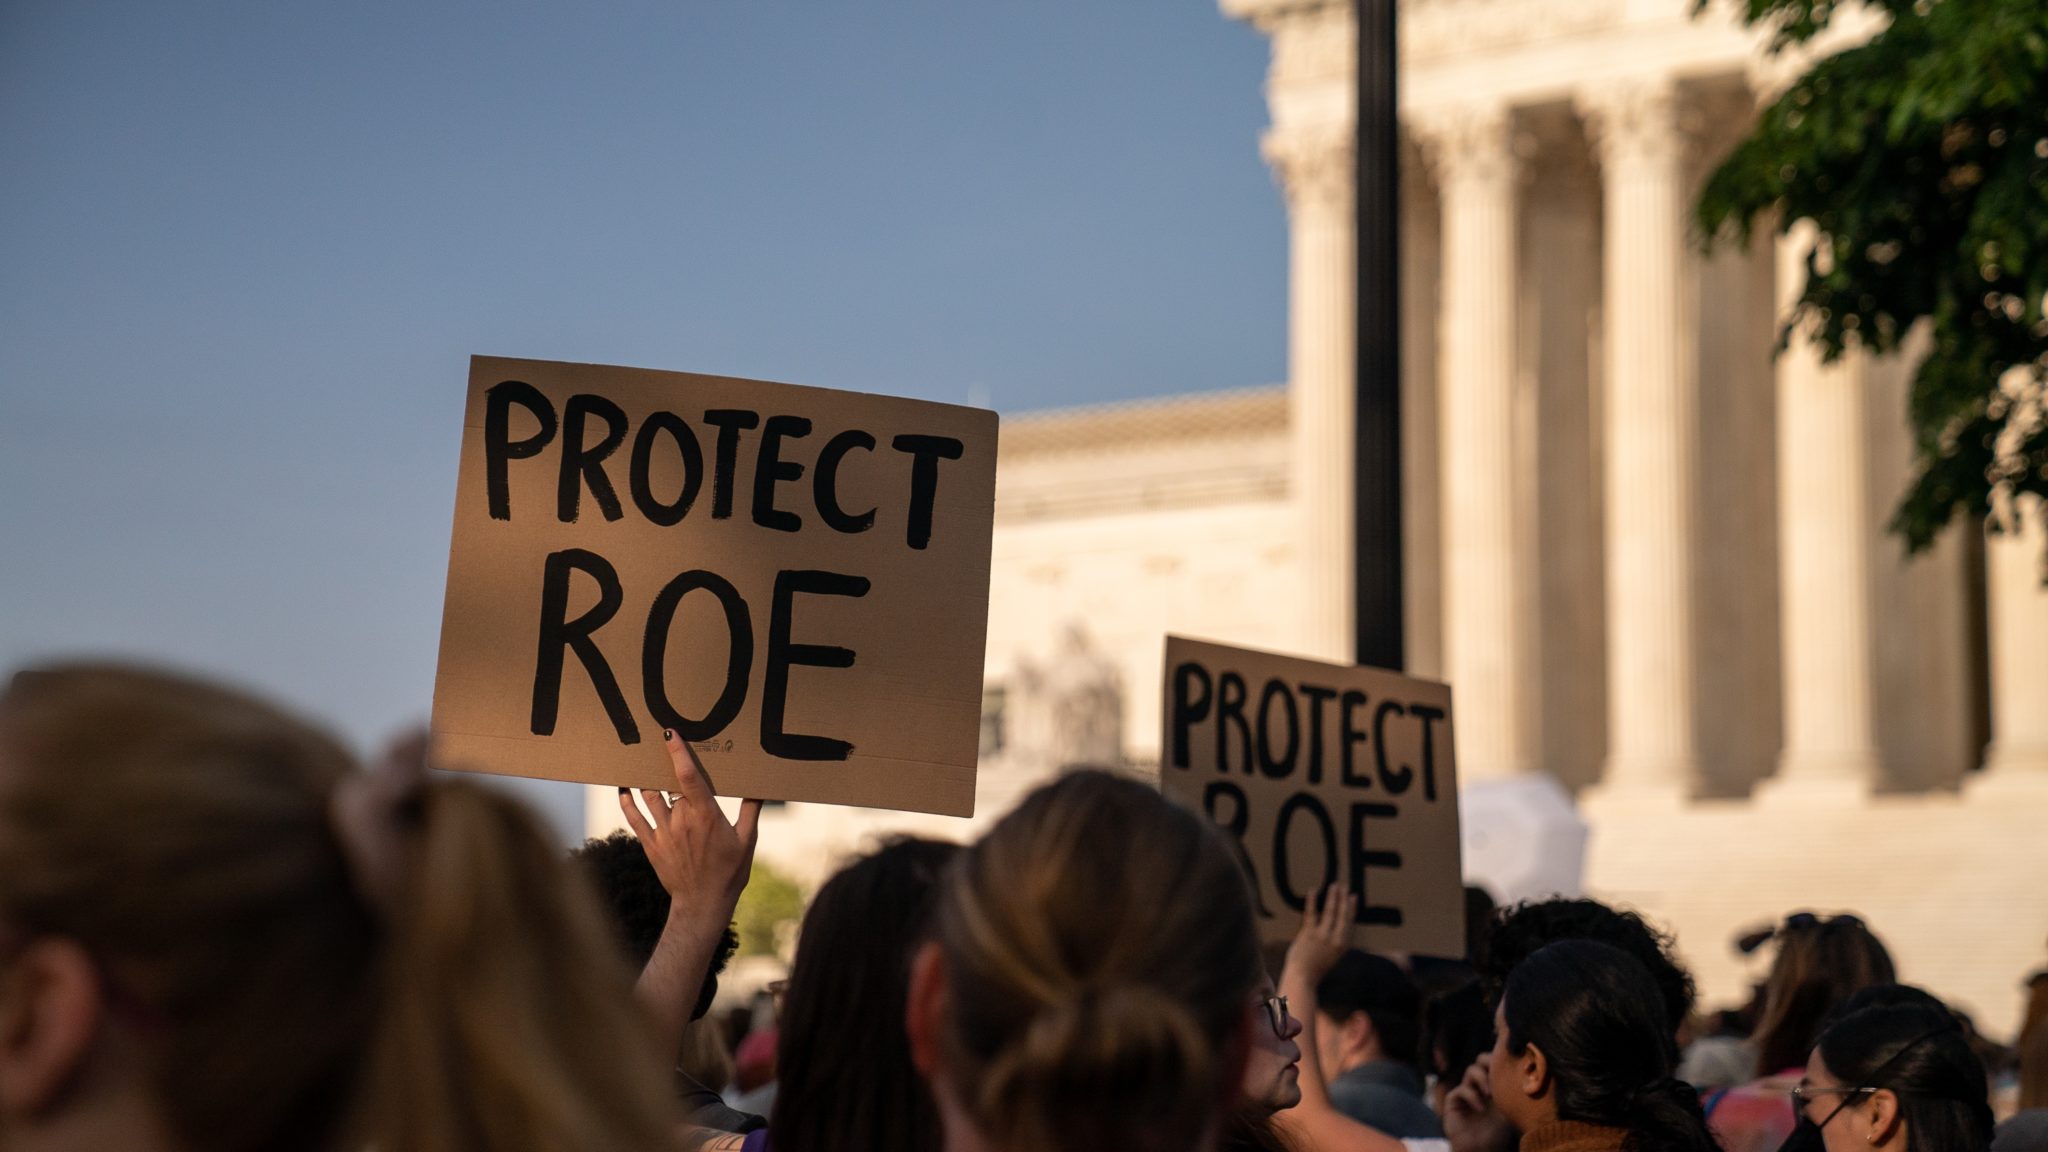 A protest in front of the Supreme Court of the United States. Two signs in the protest read 